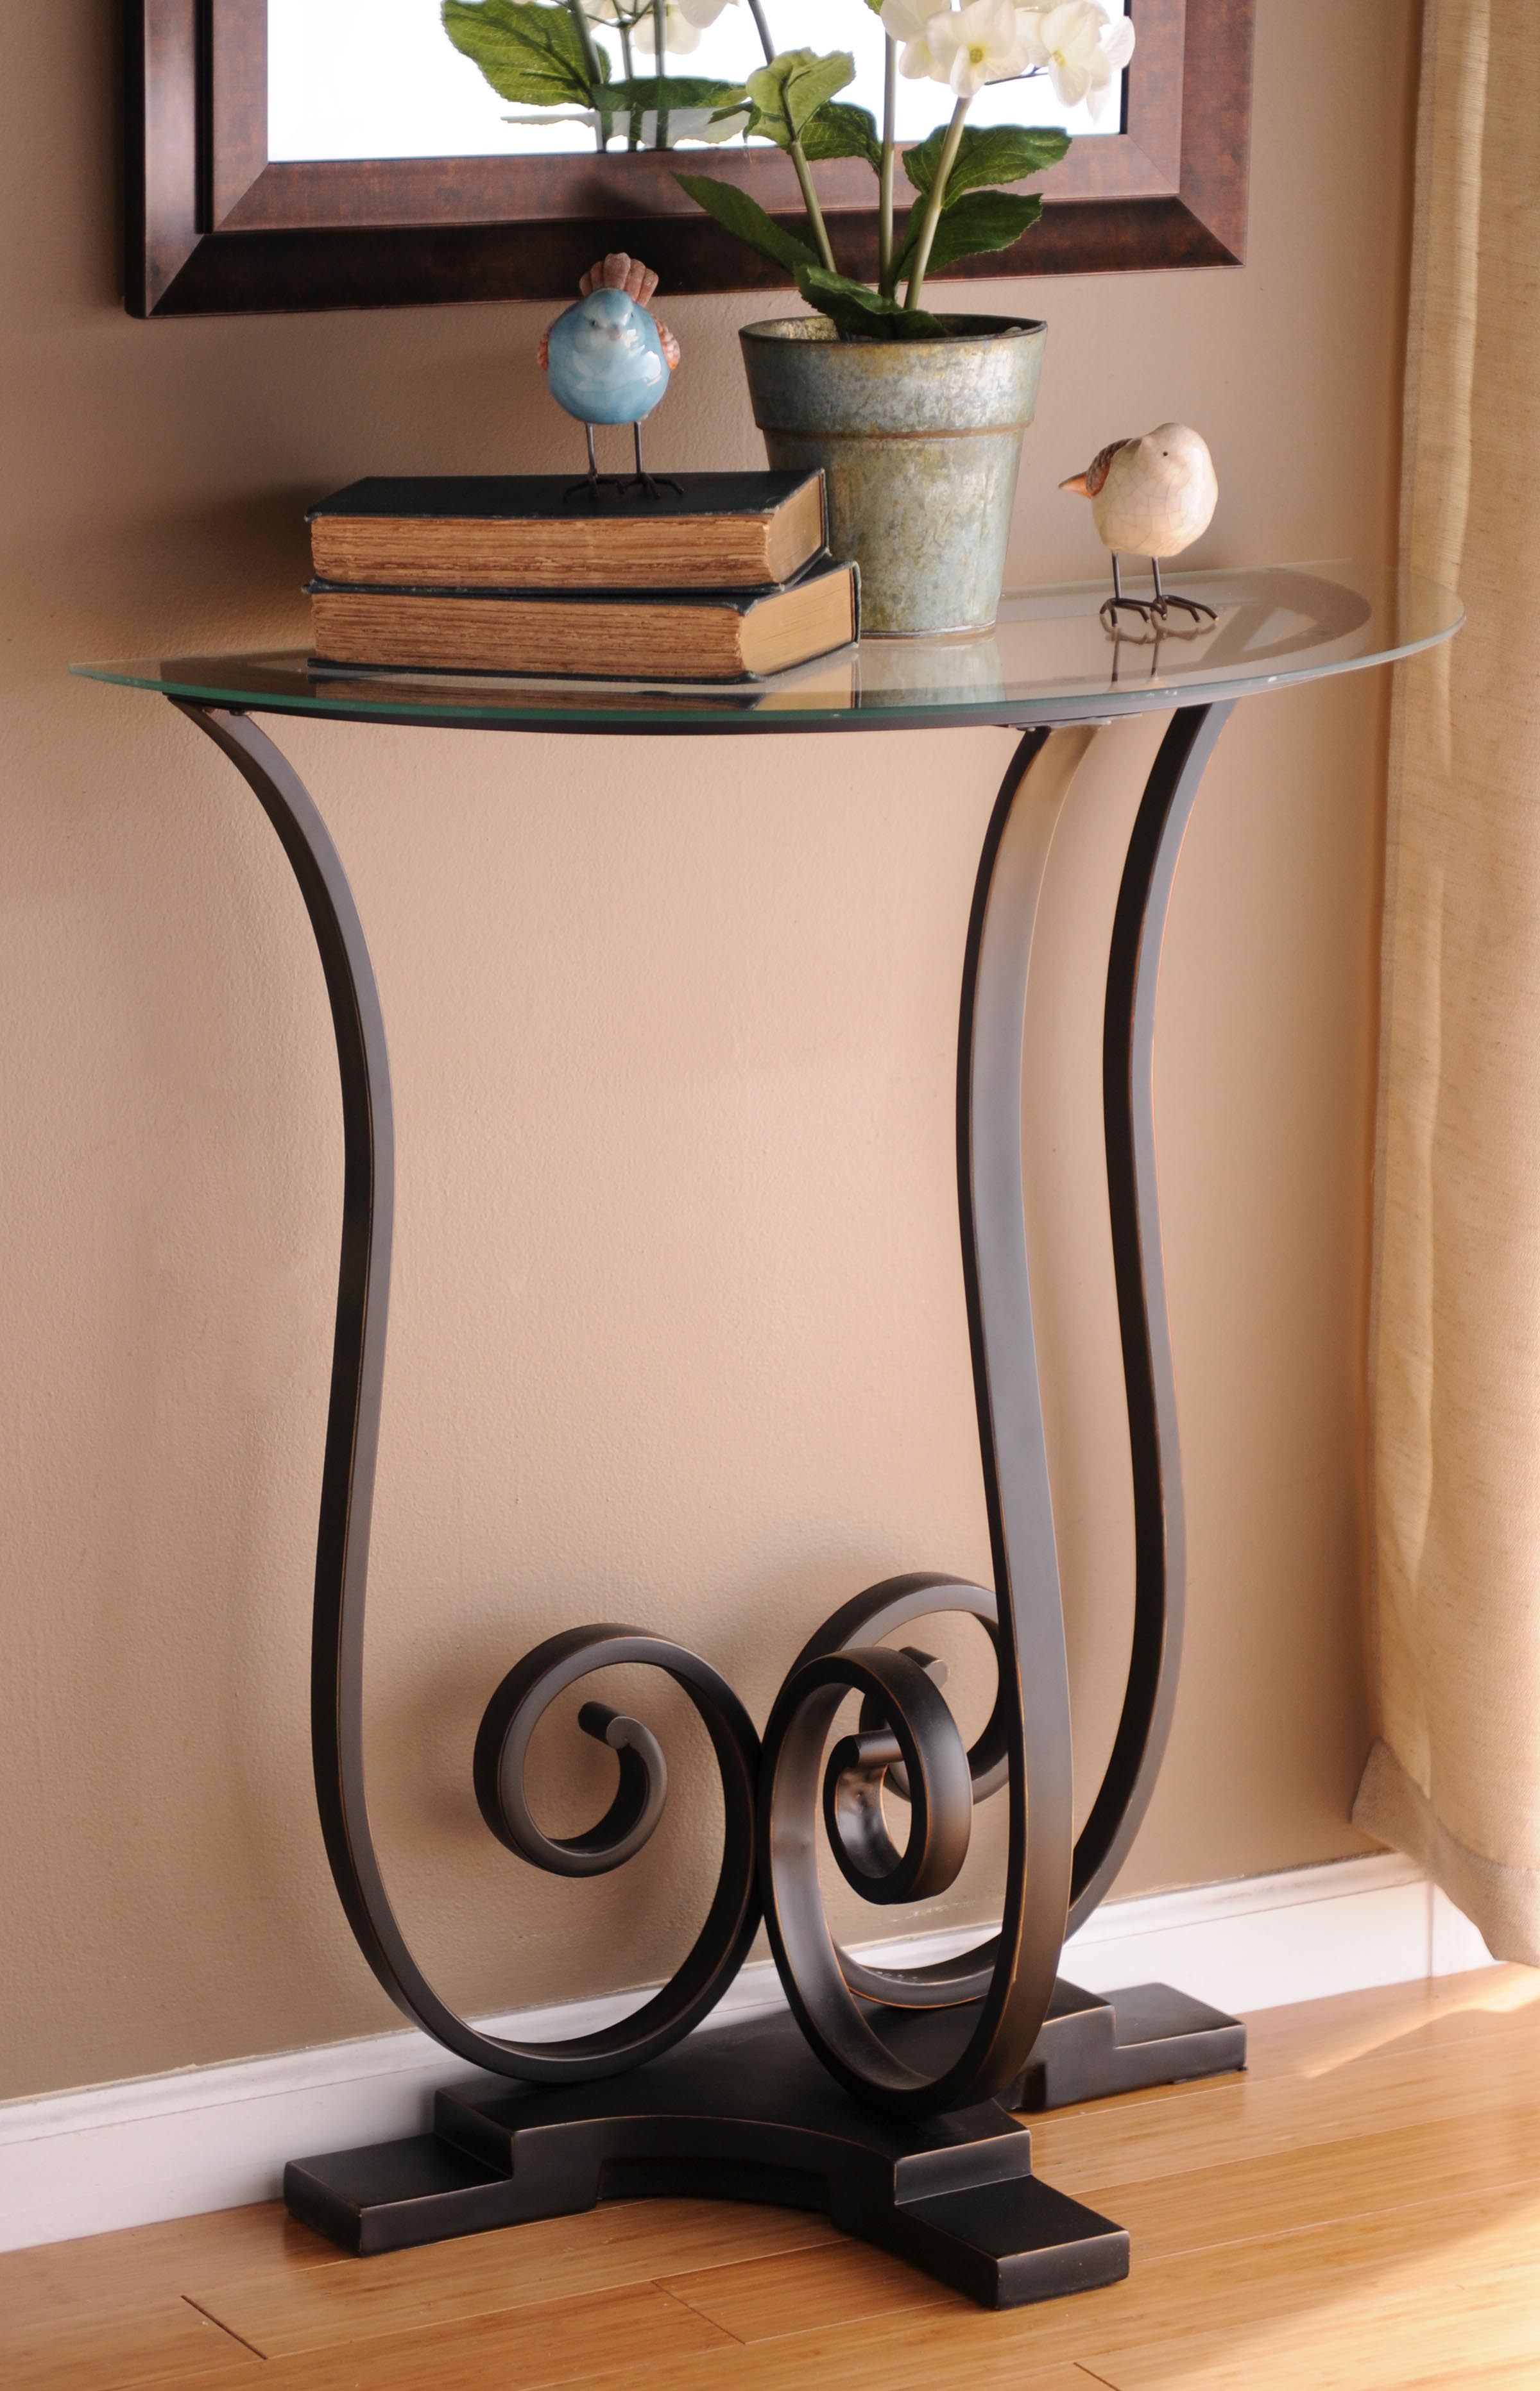 furniture mesmerizing half moon accent table with elegant looks decorative gorgeous iron long console drawers and brown wall paint end tables round circle bronze drum coffee